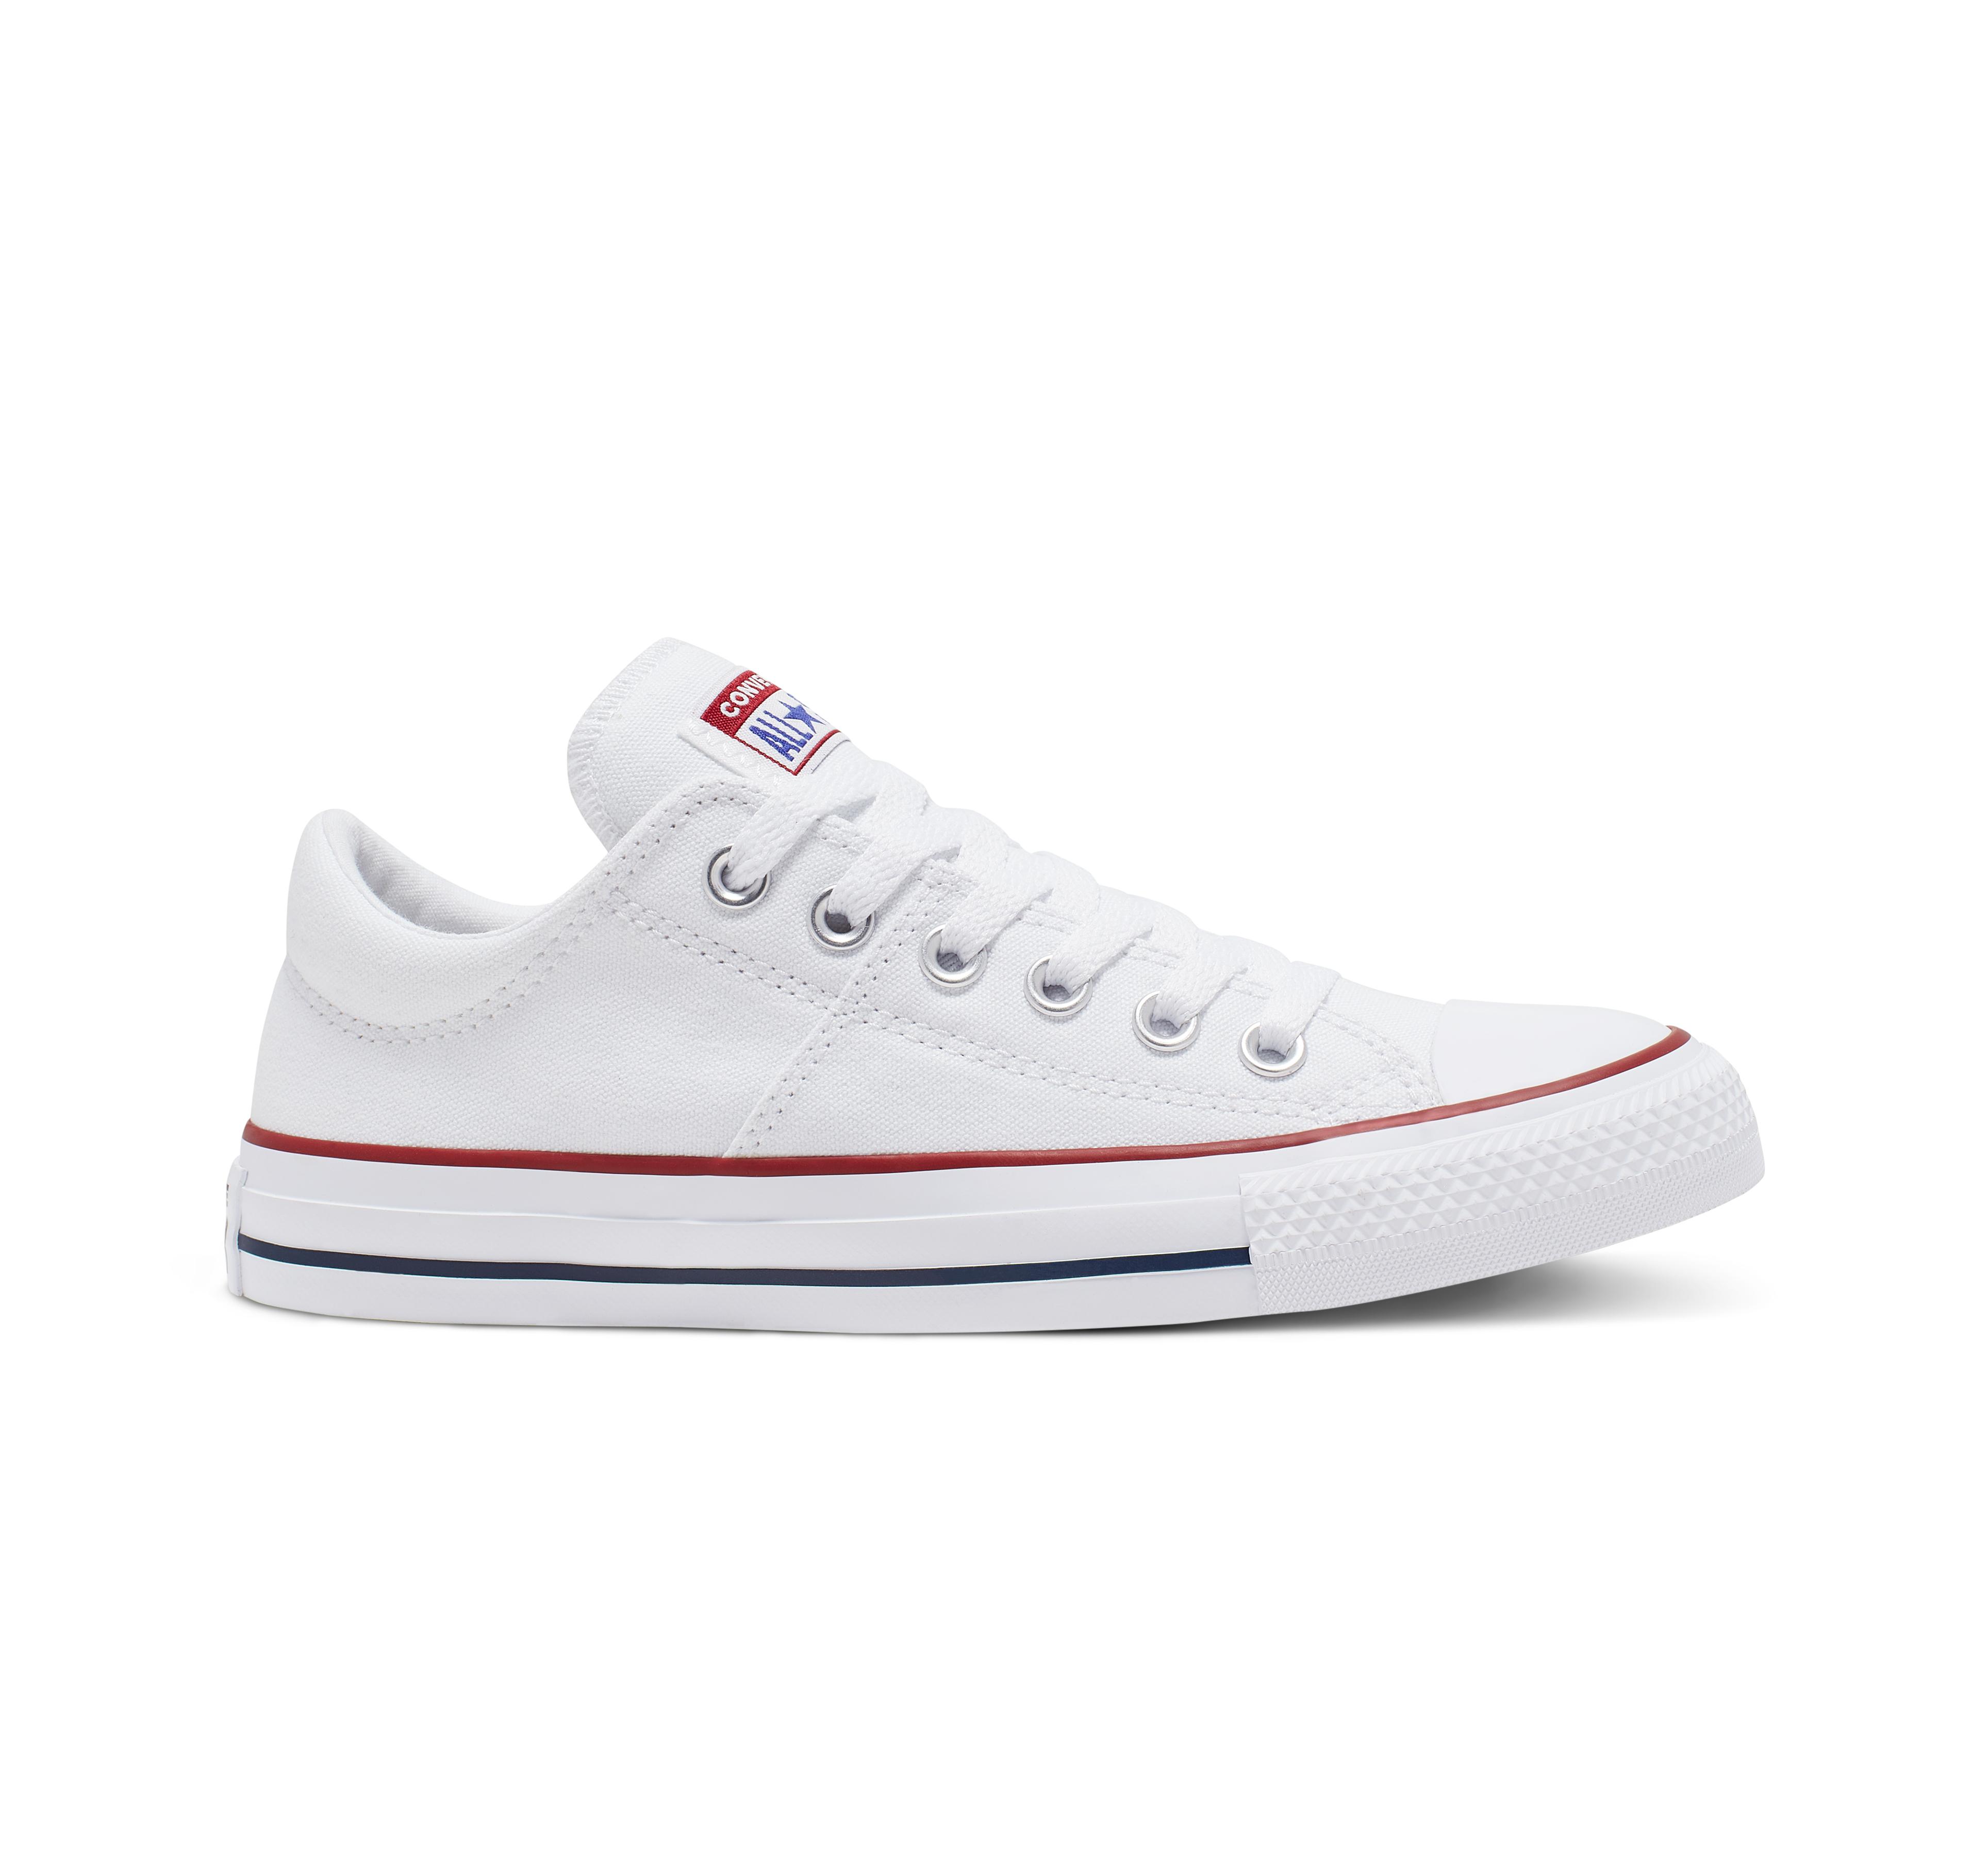 Converse Chuck Taylor All Star Madison Low Top in White - Lyst